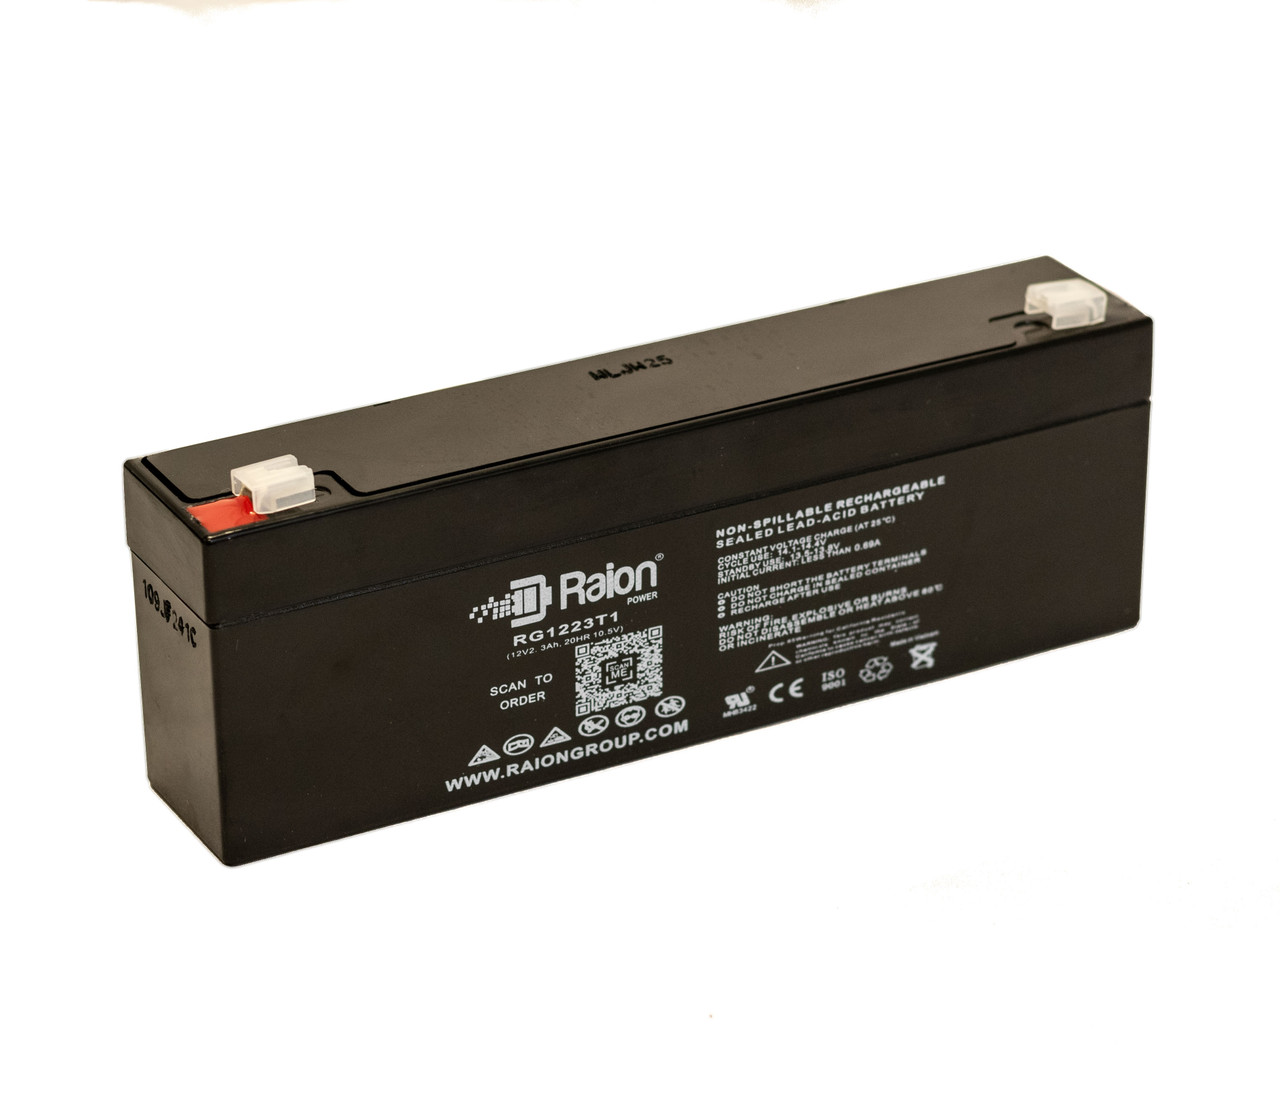 Raion Power RG1223T1 Replacement Battery for Sscor Ready Pace